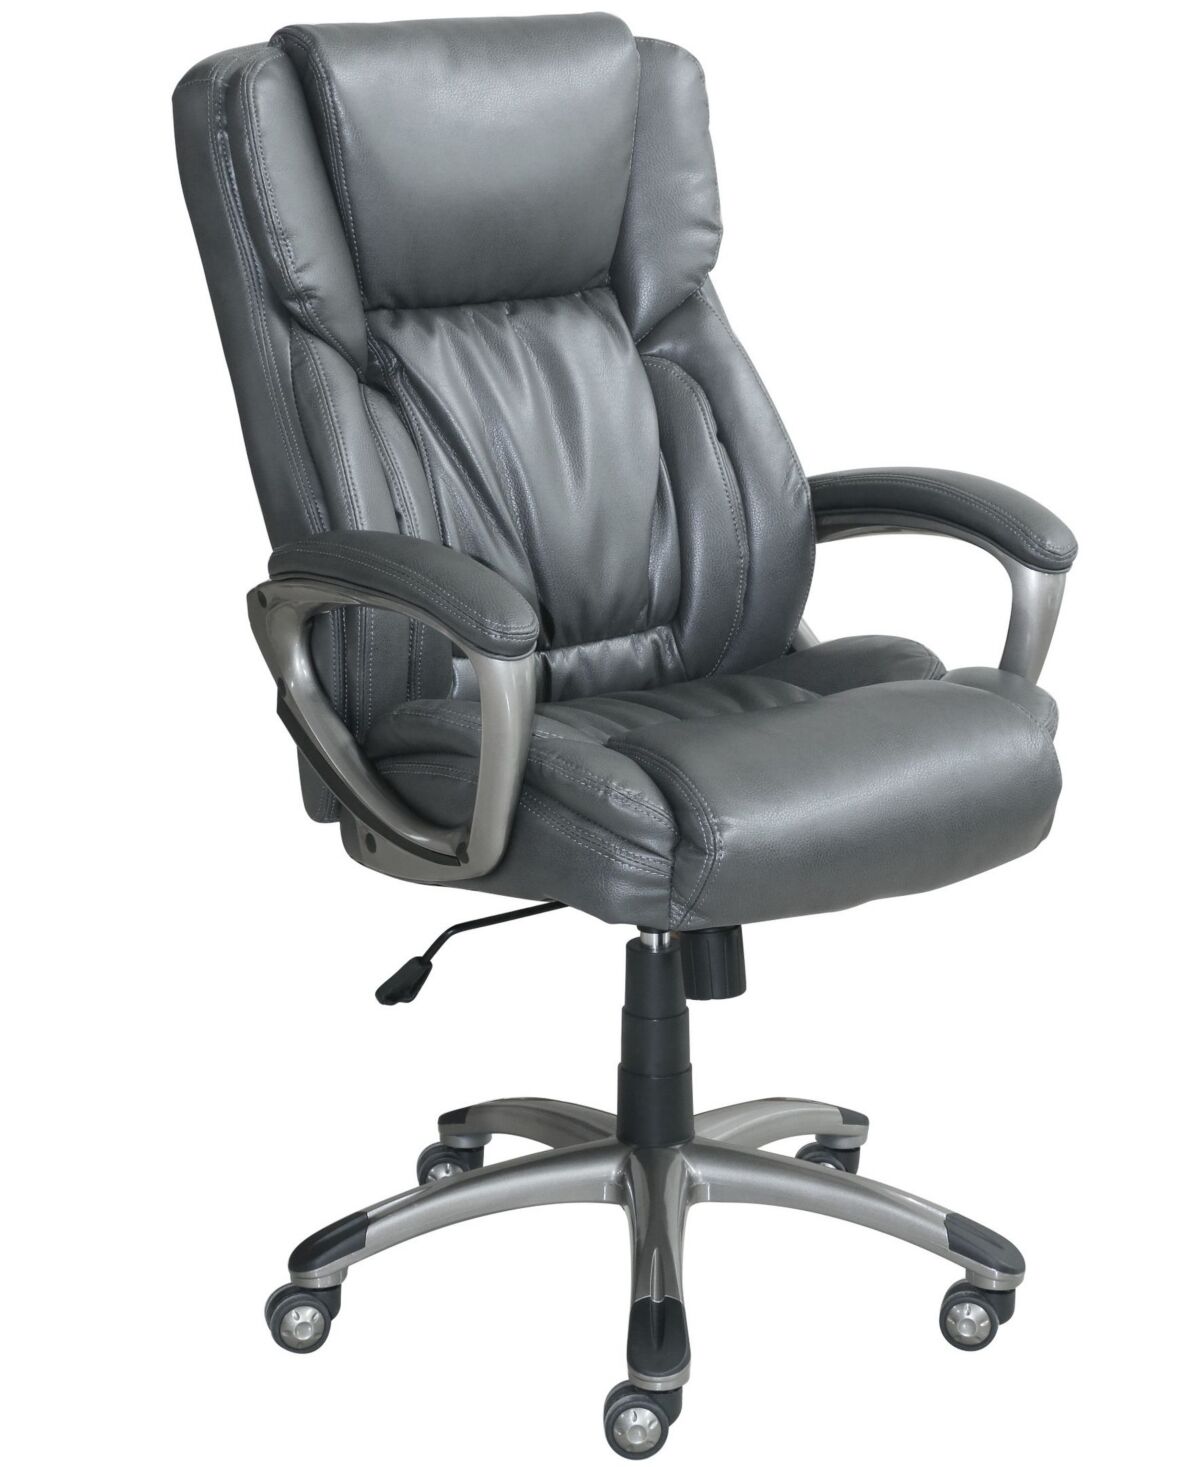 Serta Works Executive Office Chair - Gray